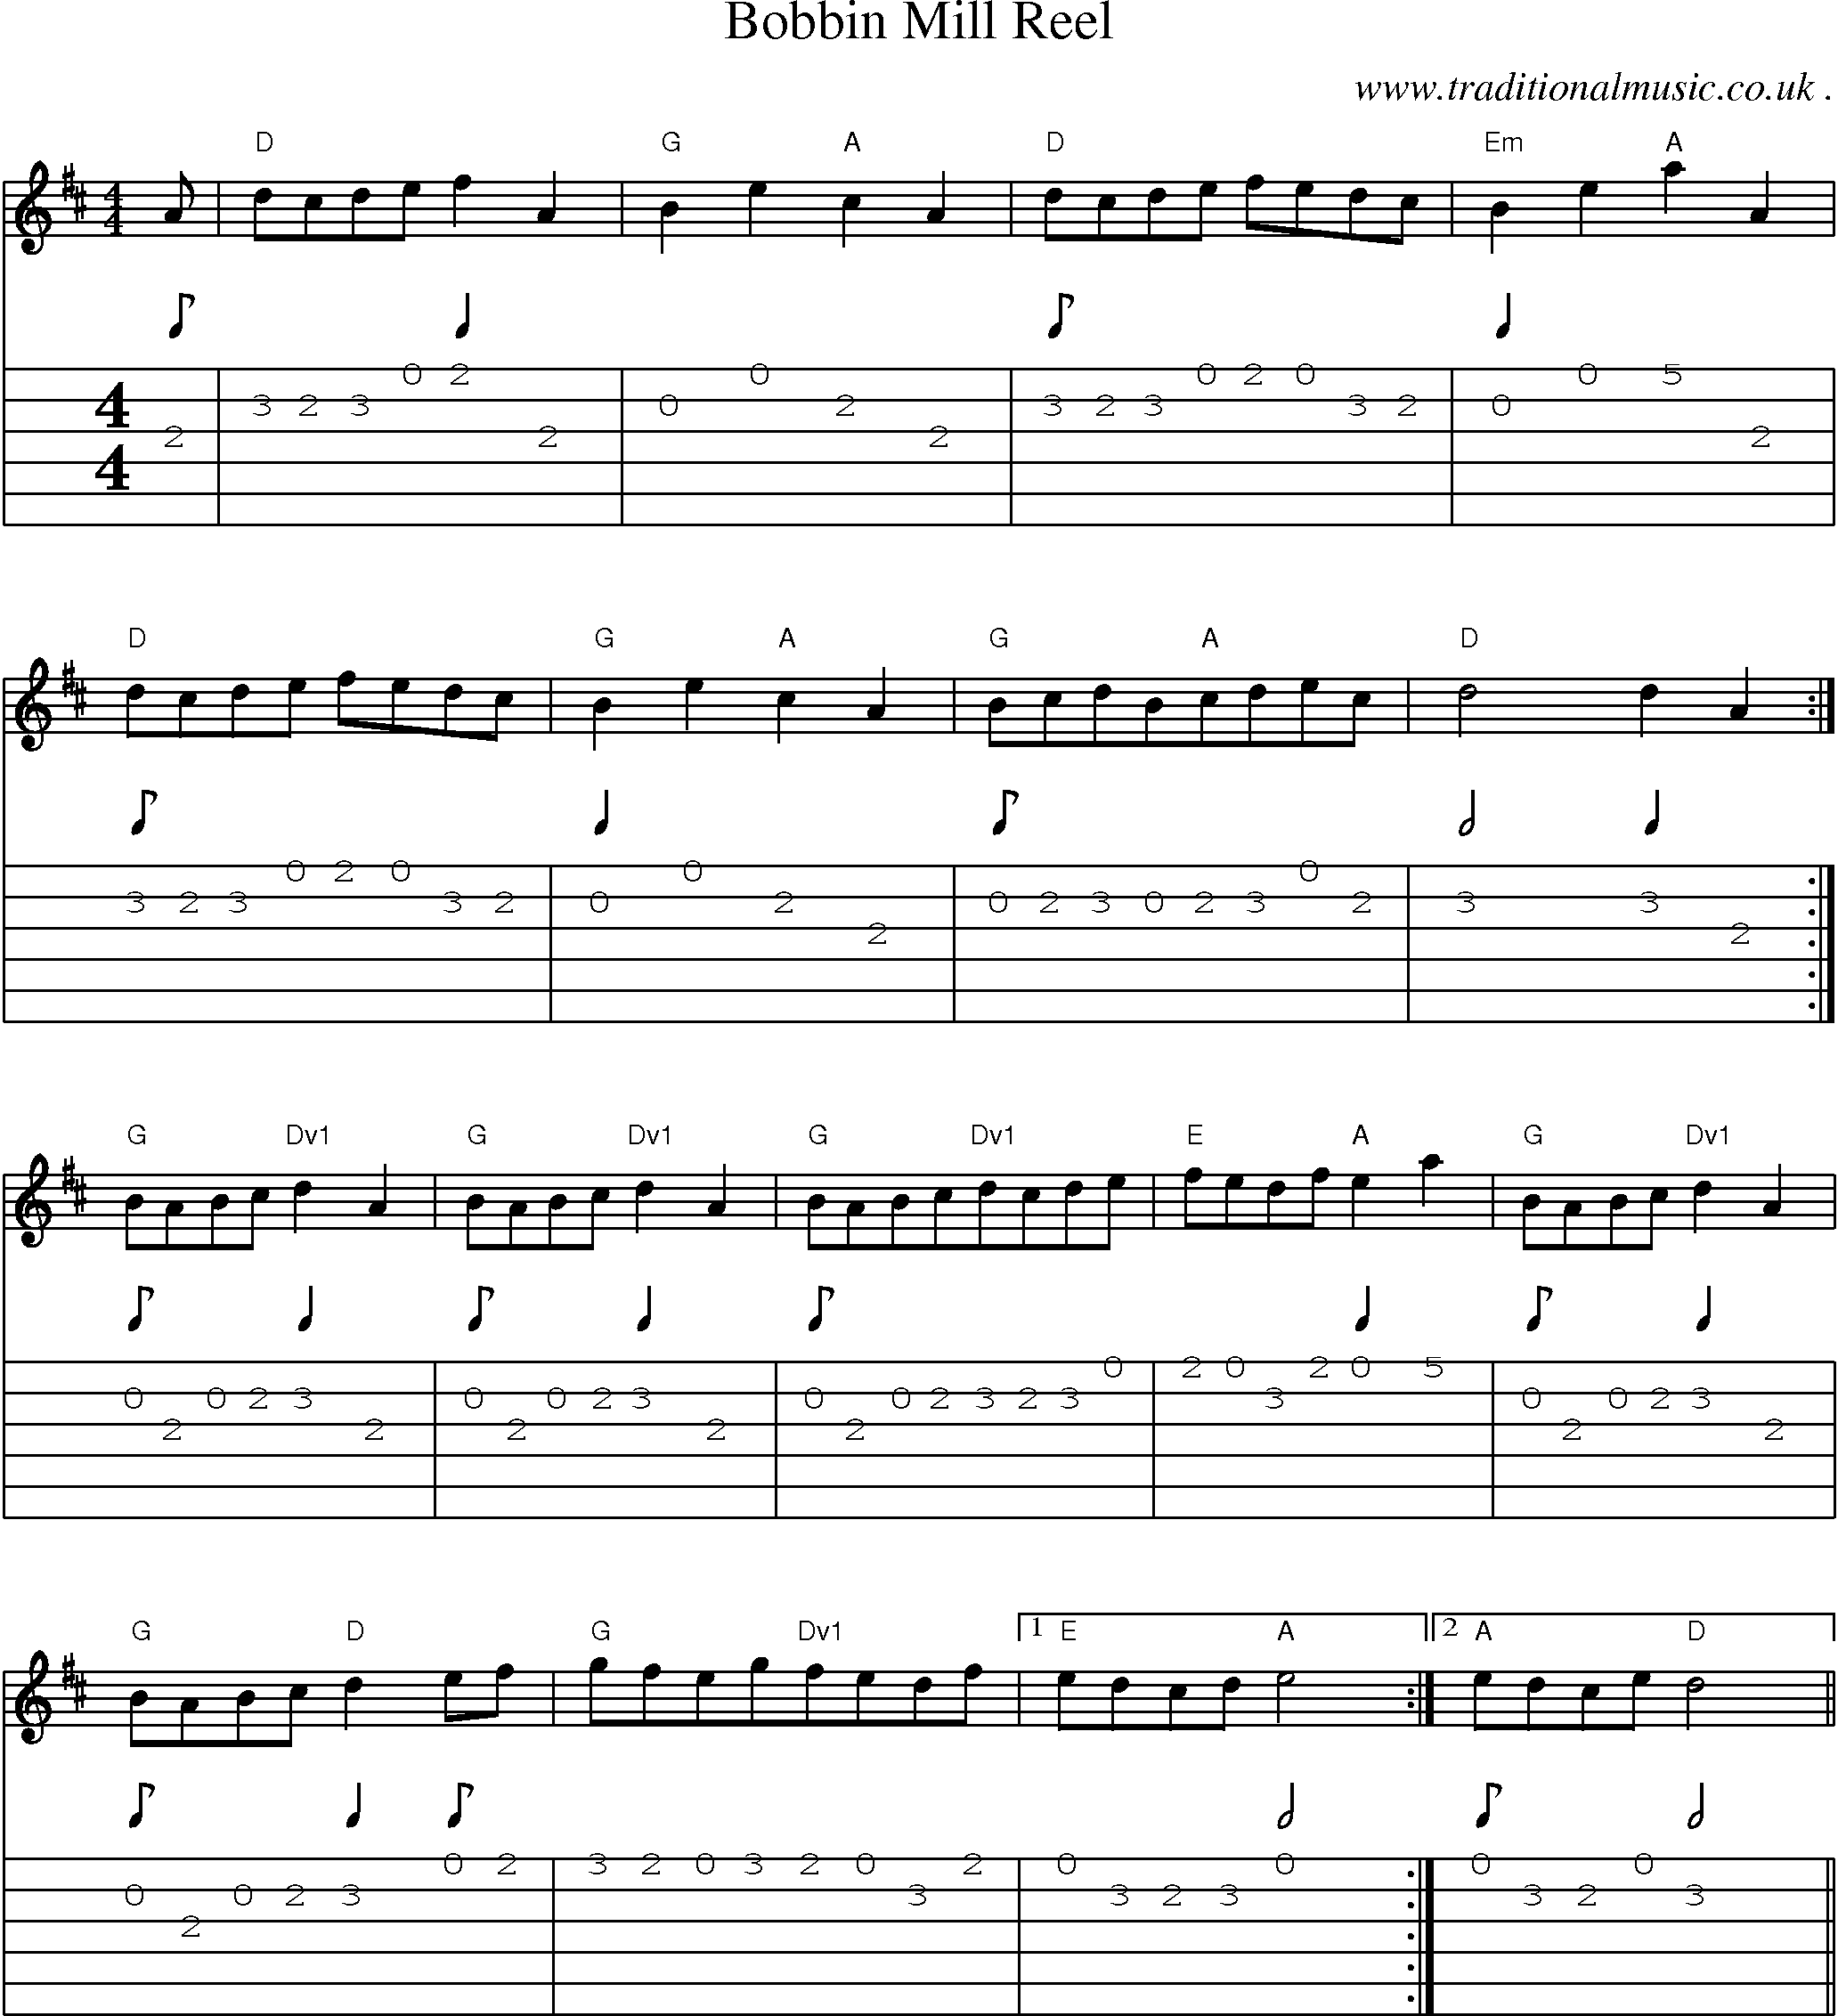 Sheet-Music and Guitar Tabs for Bobbin Mill Reel